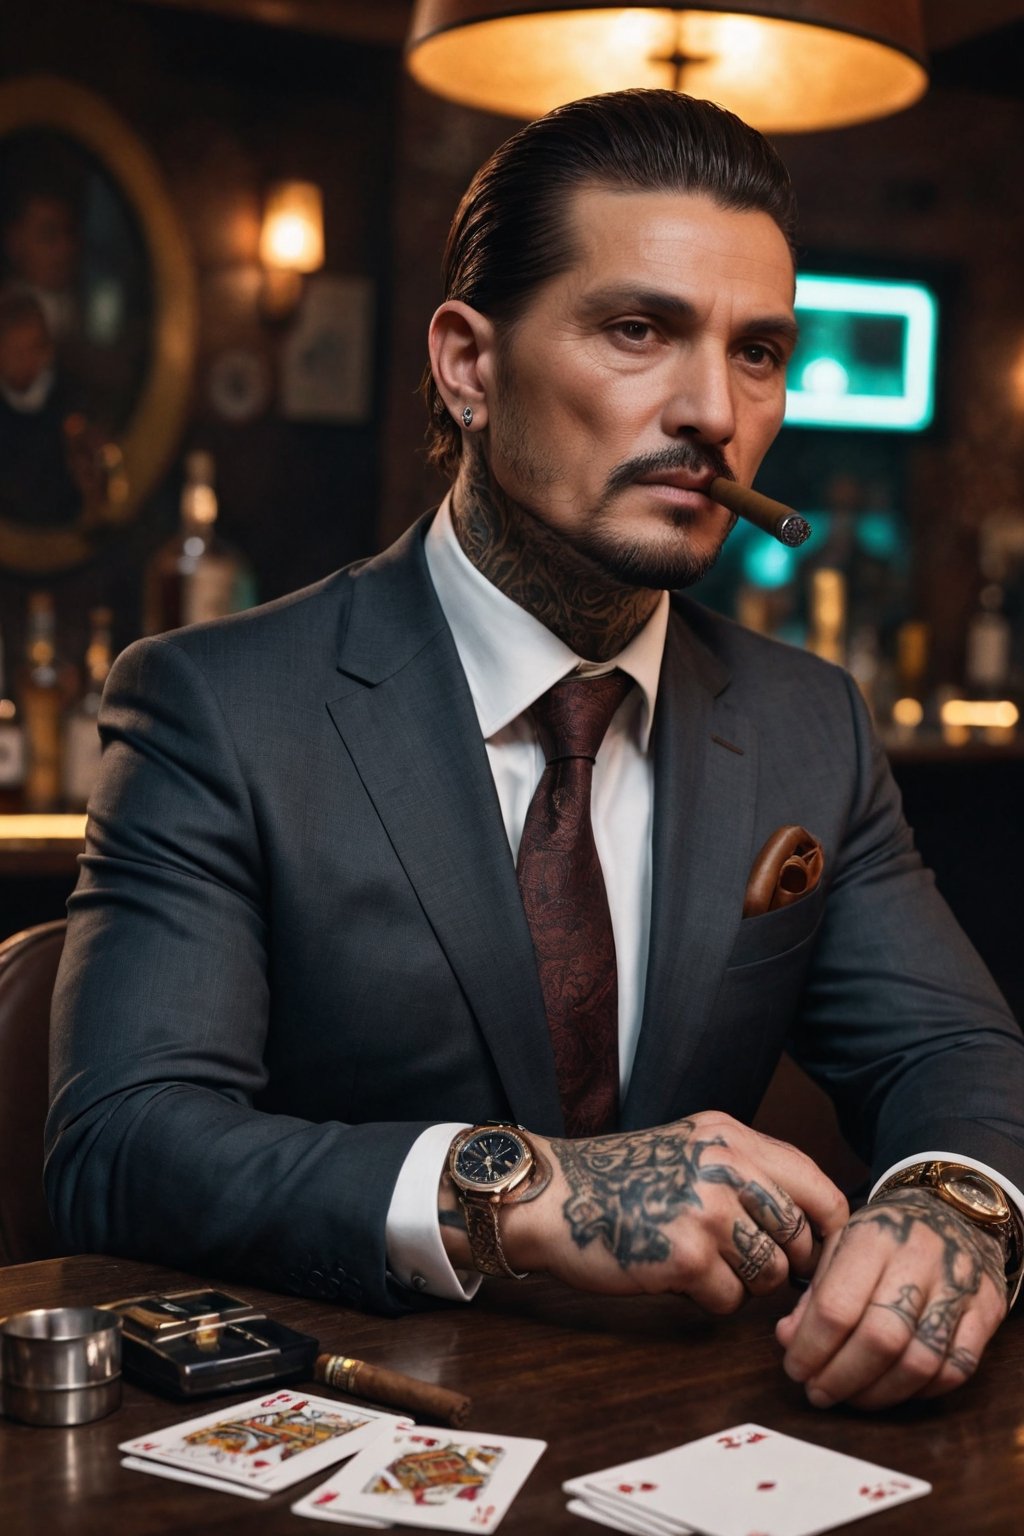  A man with a dangerous atmosphere, an Italian mafia member, tattoos on his face, an intimidating and strong look, a business suit, an expensive watch, a bar background, a table with cards and car keys, an ashtray and a cigar,Perfect Hands